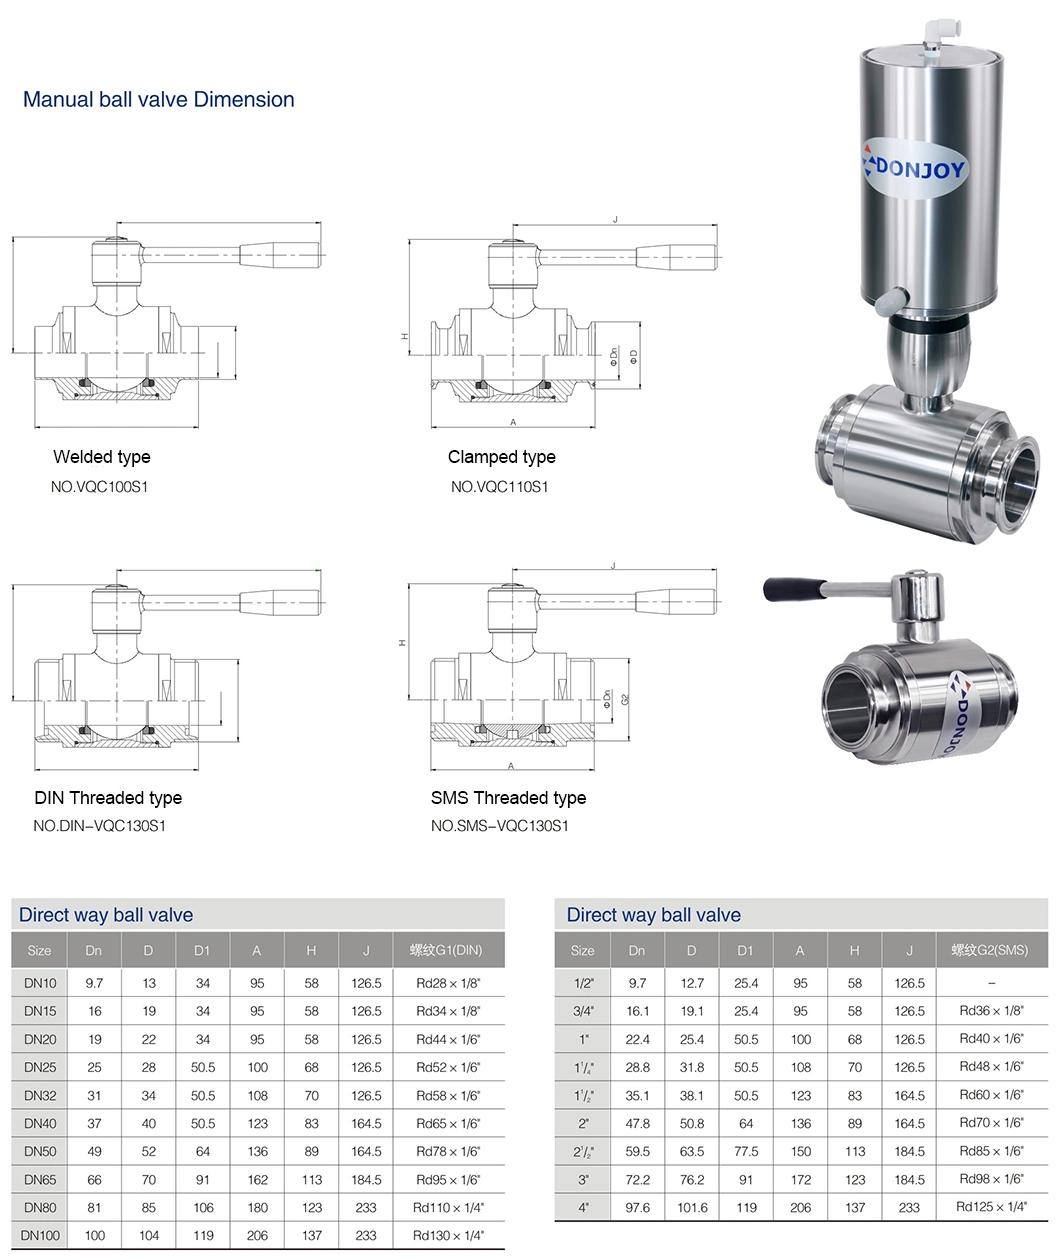 CE Hygienic 3-Way Ball Valve with Stainless Steel Actuator